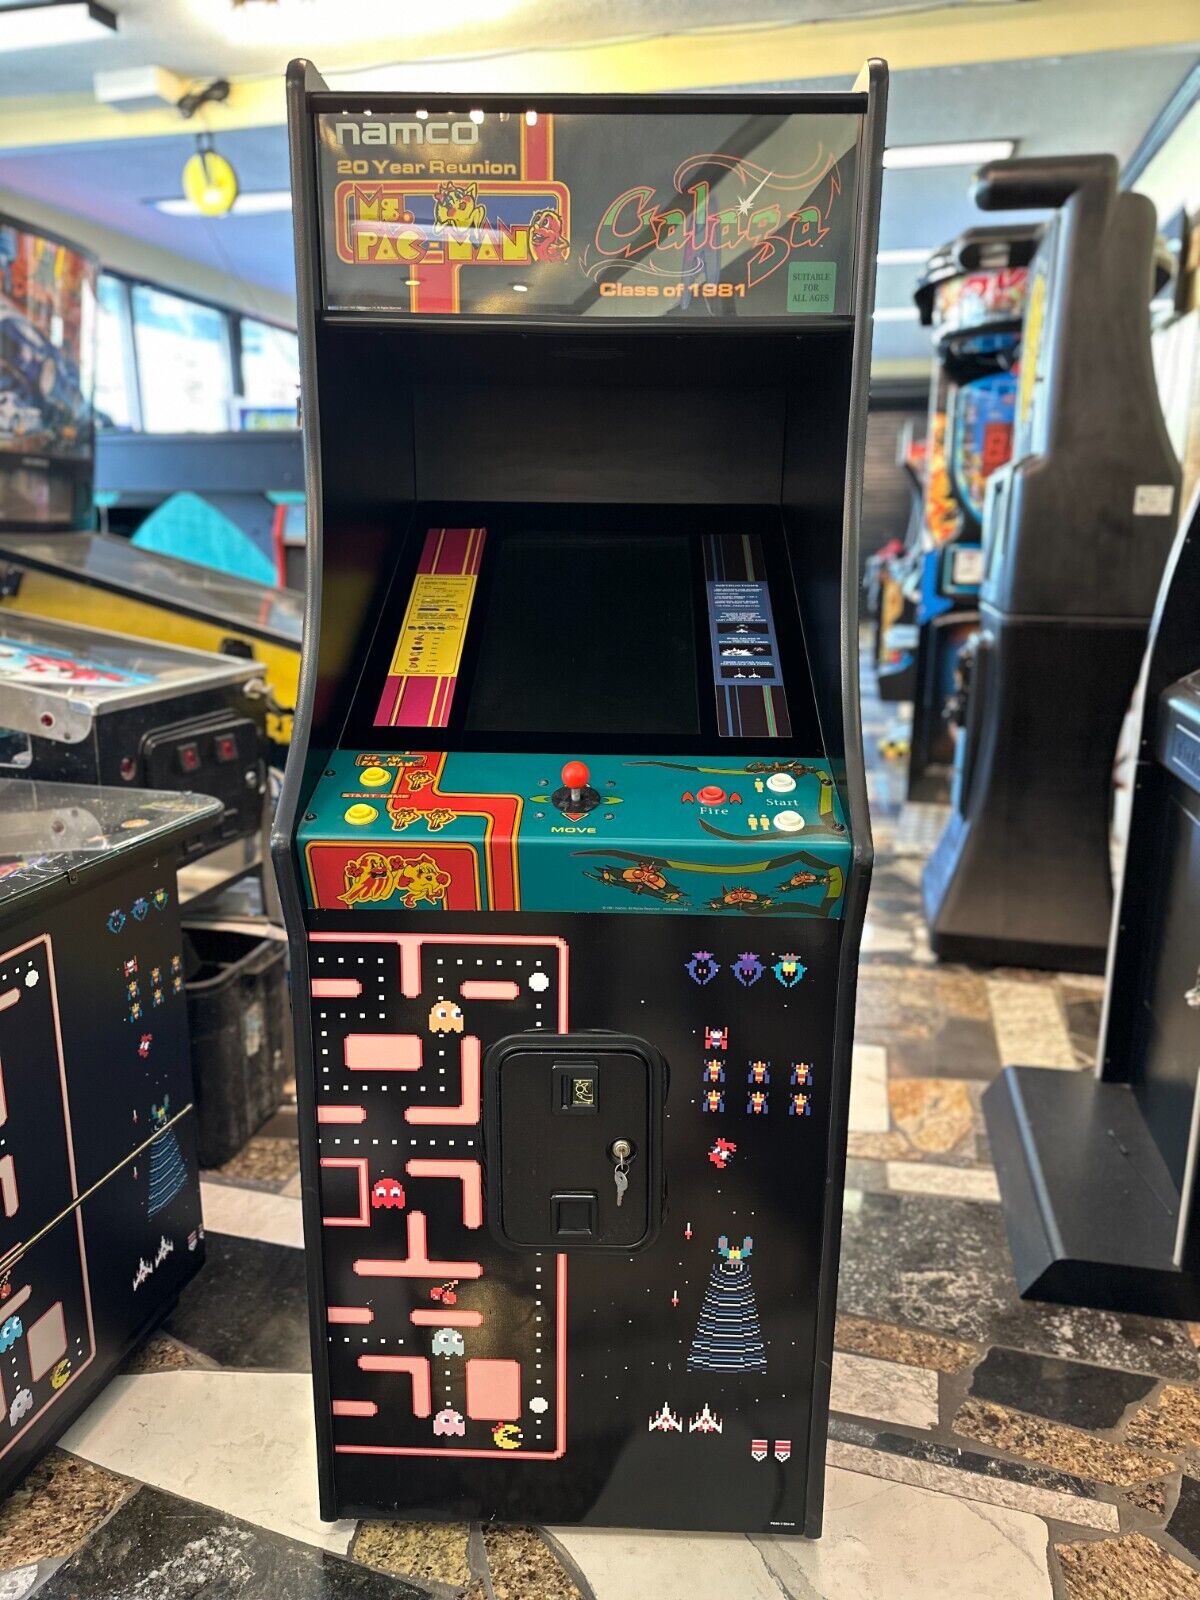 NAMCO 20 YEAR REUNION MS PACMAN GALAGA CLASS OF 1981 HEAVY DUTY COMMERCIAL GRADE